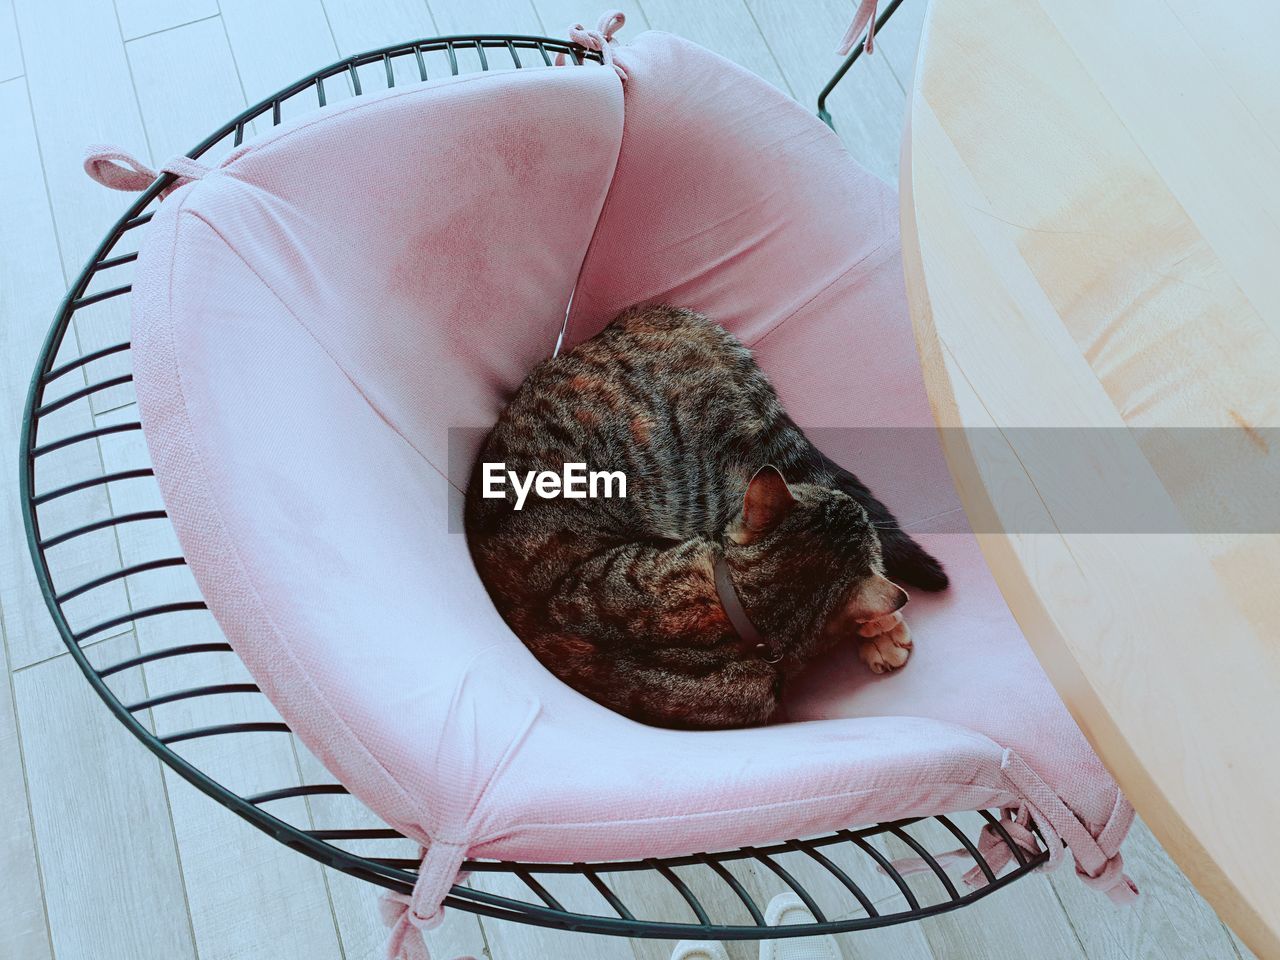 HIGH ANGLE VIEW OF A CAT SLEEPING ON SEAT